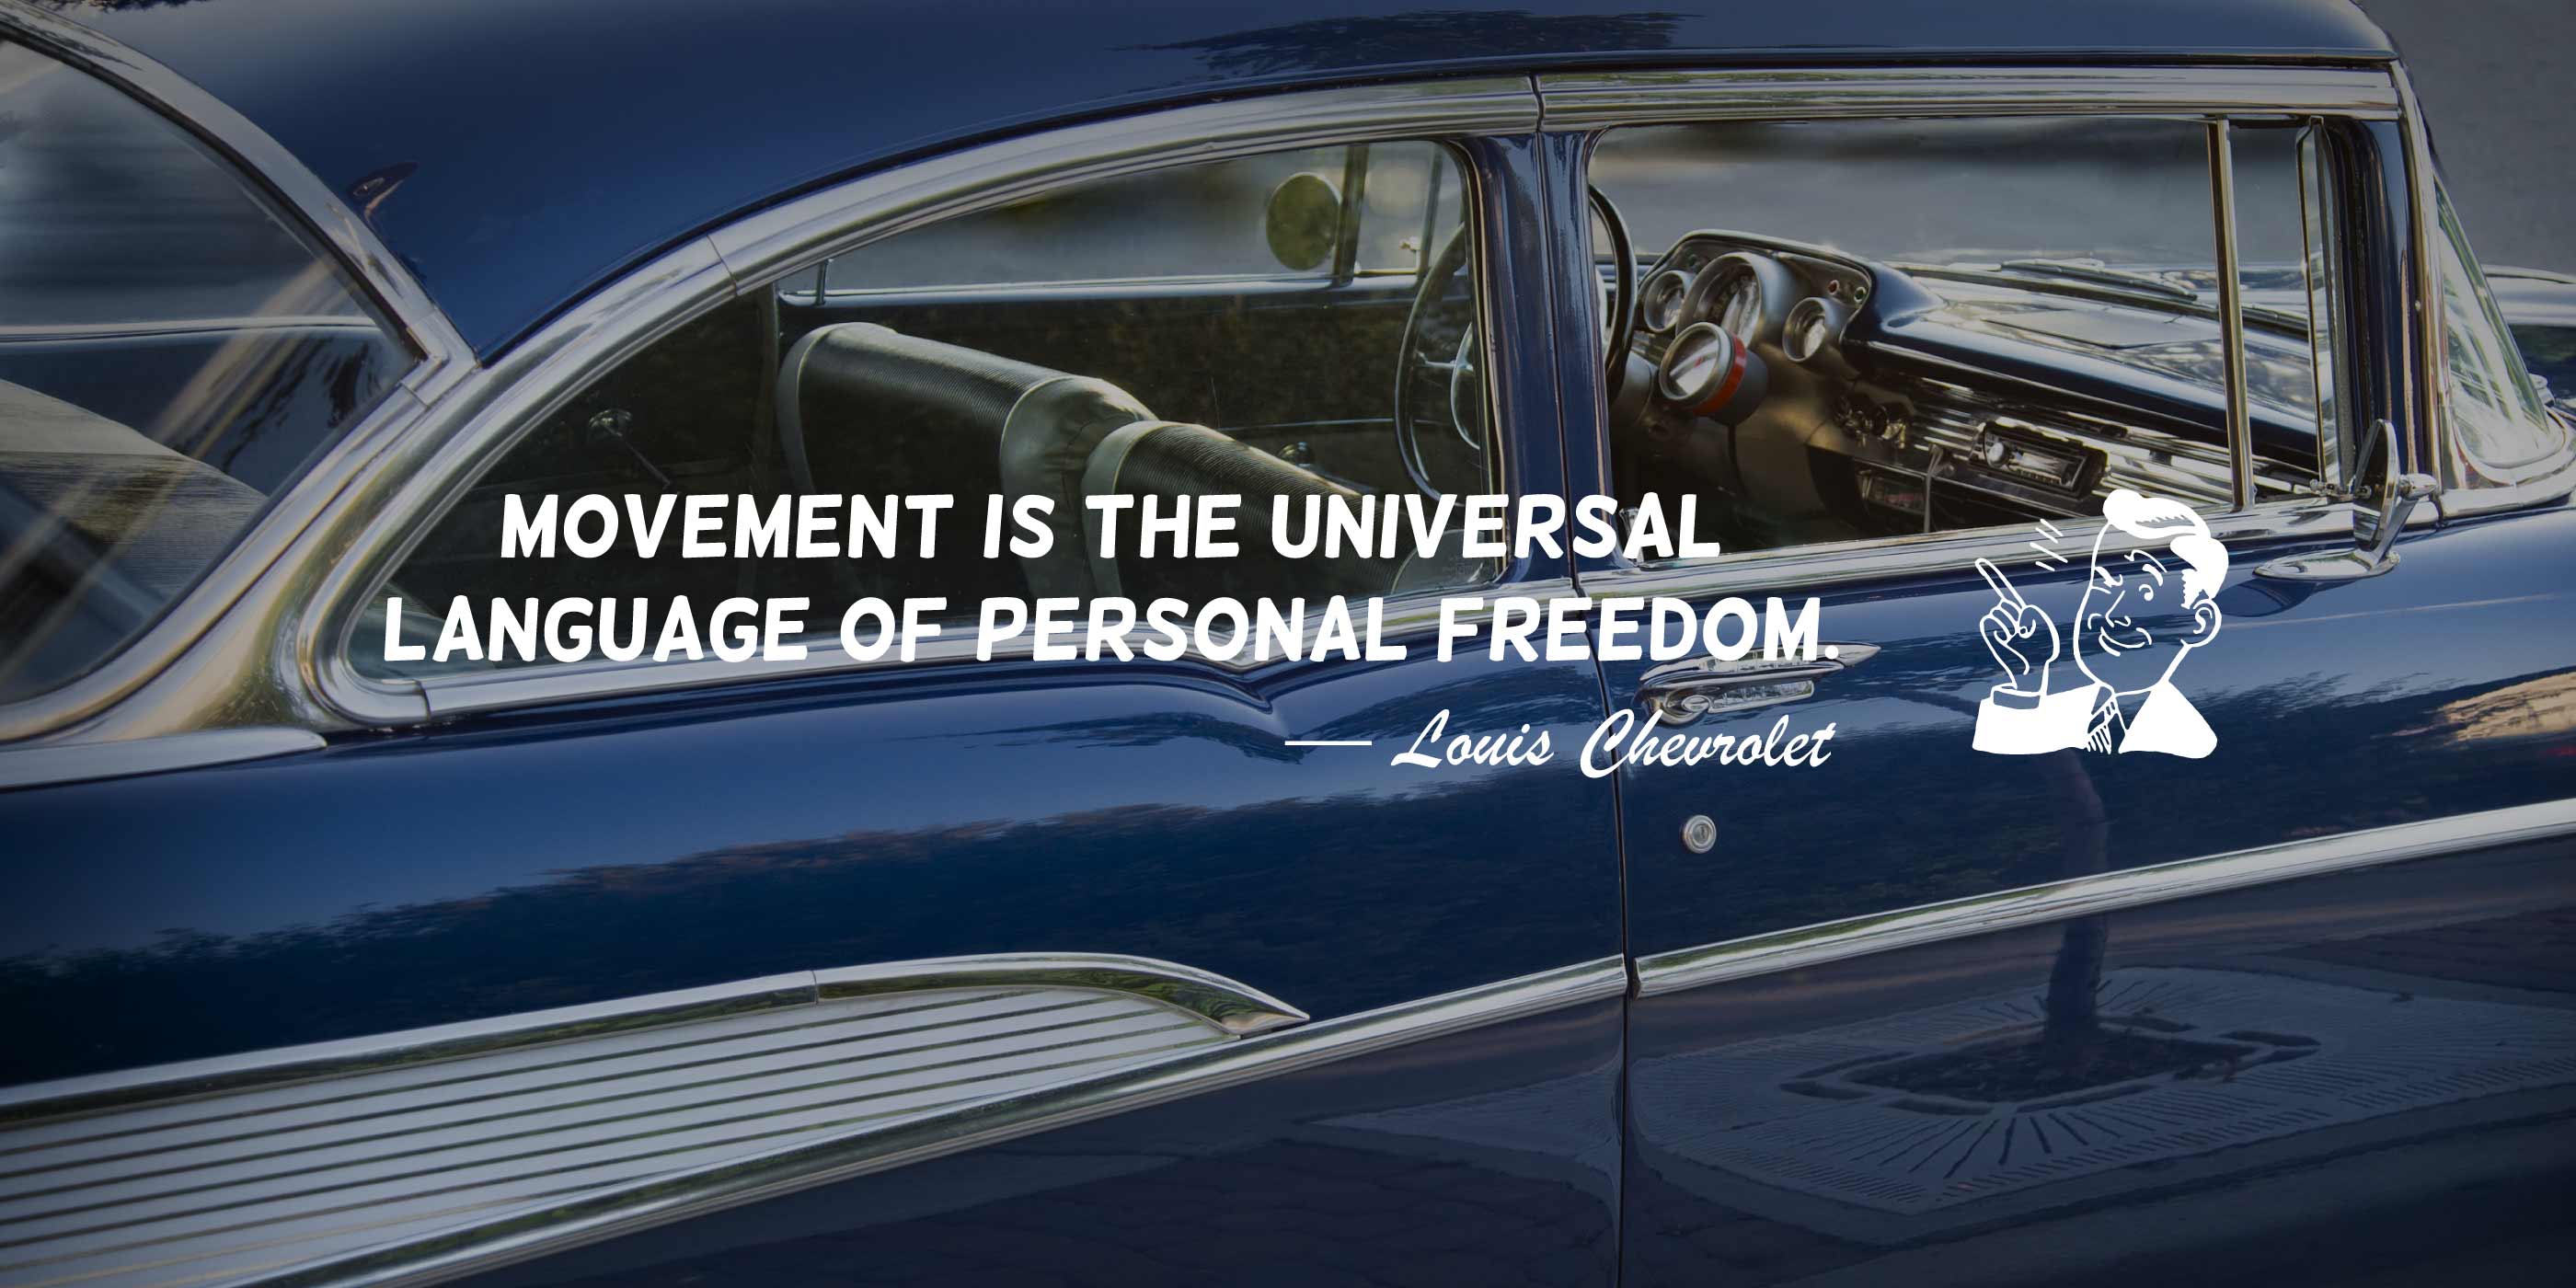 Movement is the universal language of personal freedom. - Louis Chevrolet